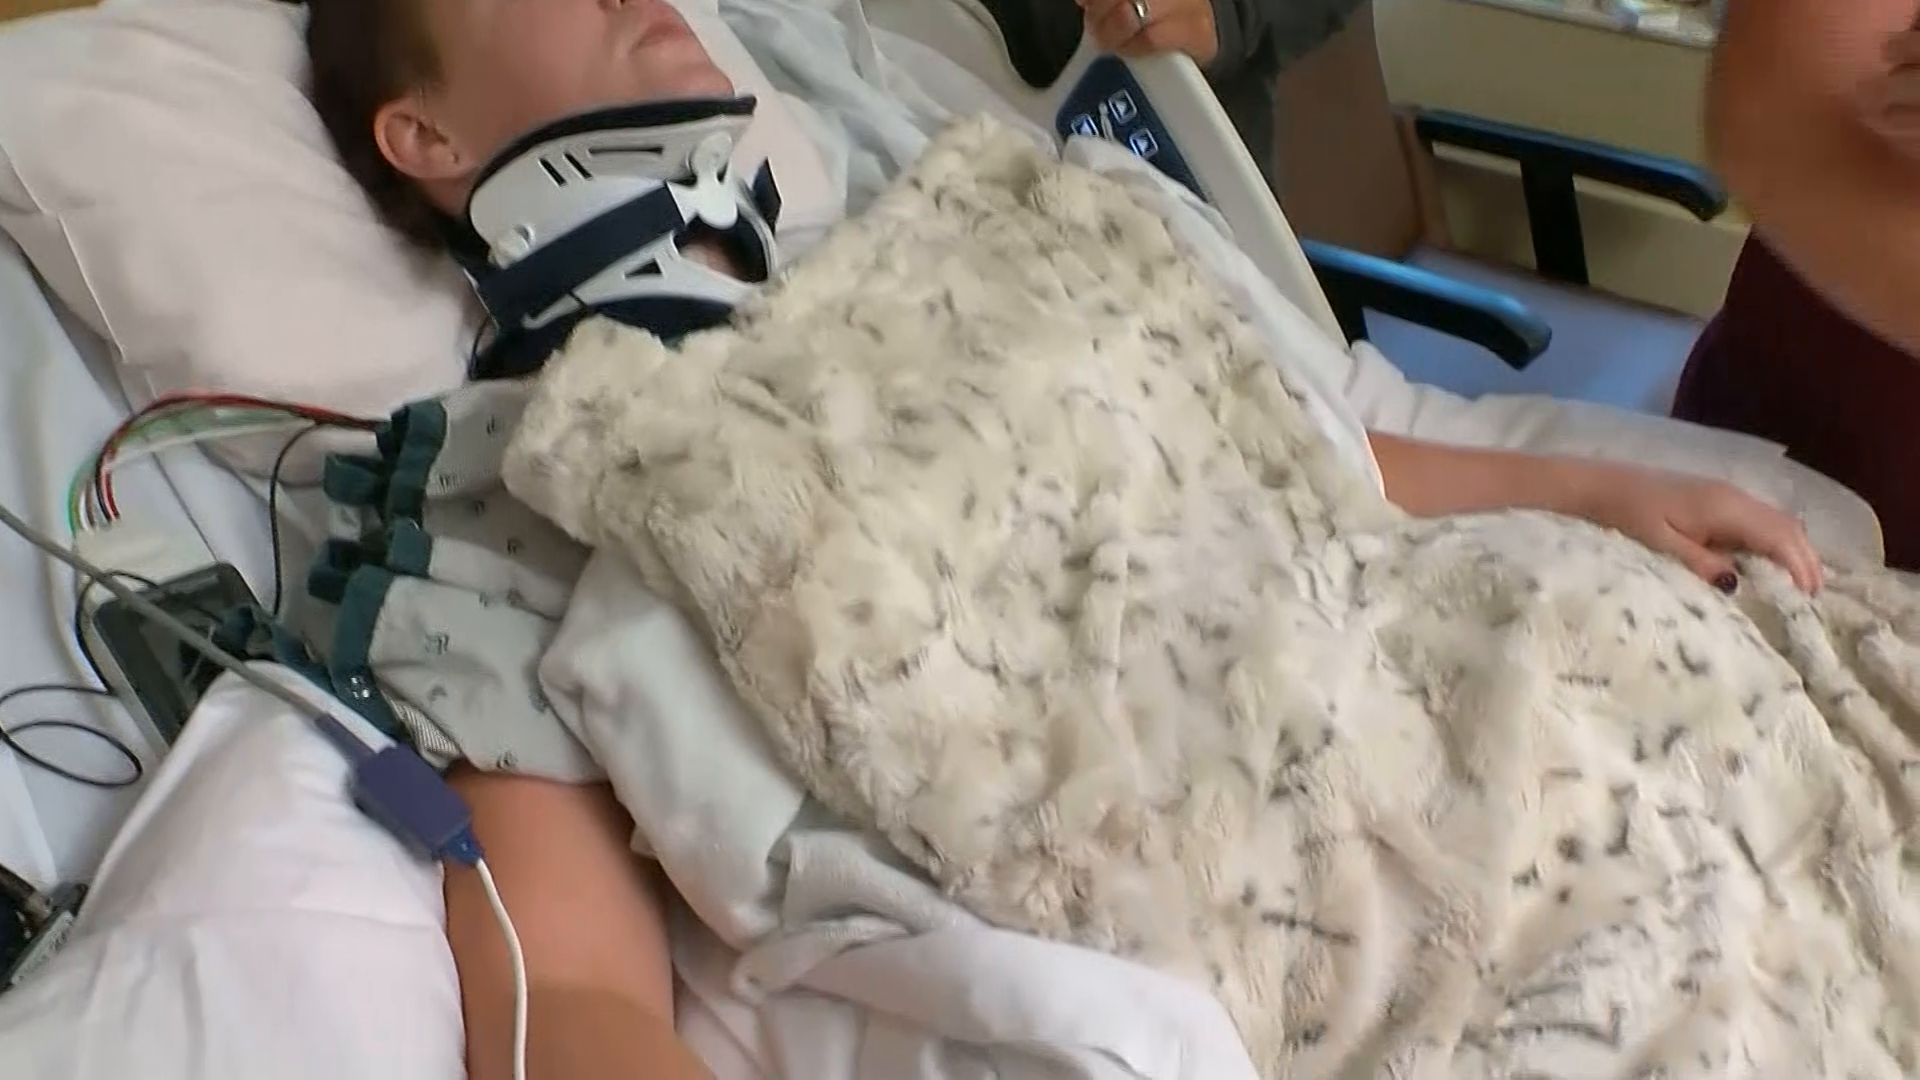 Woman paralyzed in hammock accident